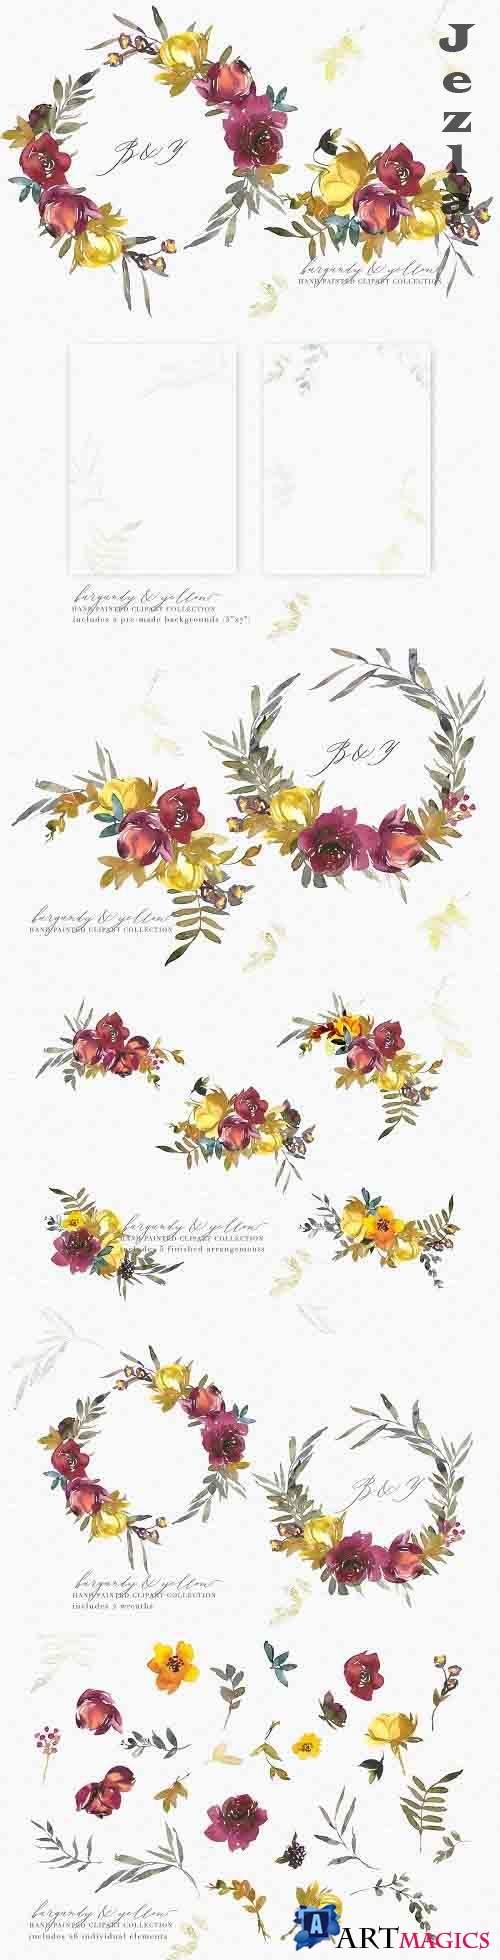 Burgundy & Yellow Watercolor Clipart - 5224883